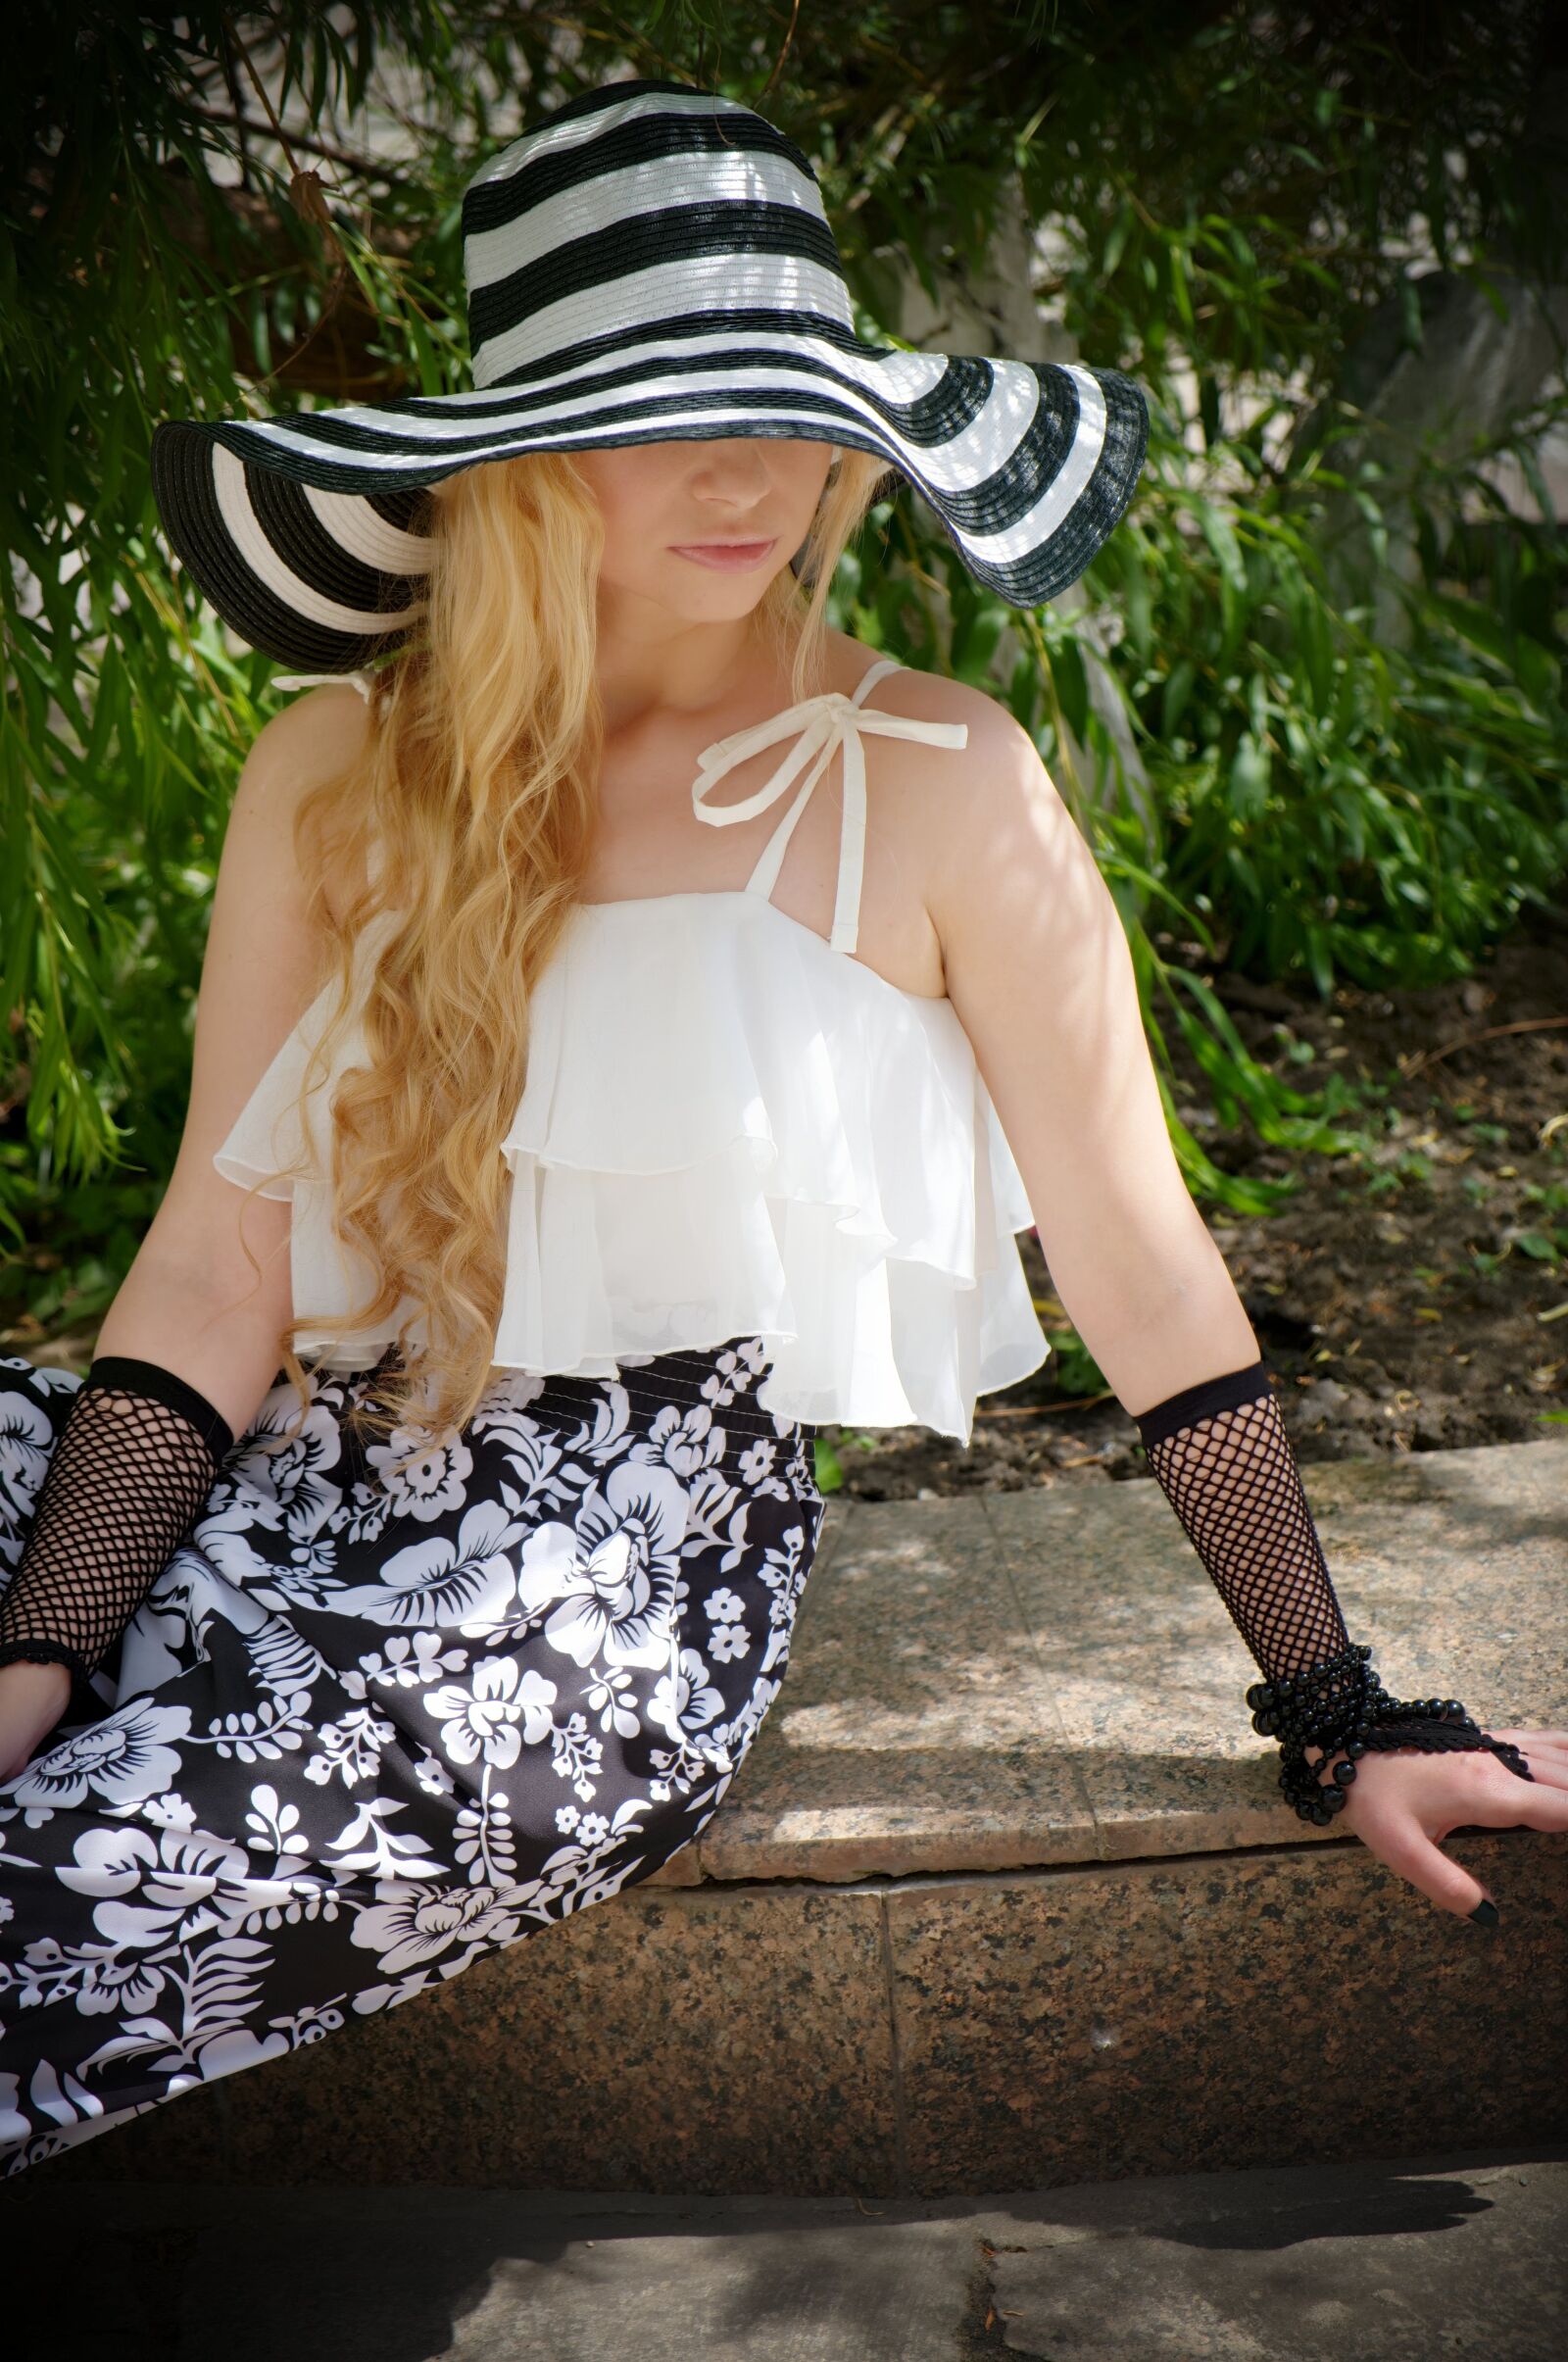 Fujifilm X-A1 sample photo. Hat, wide-brimmed hat, elegantly photography